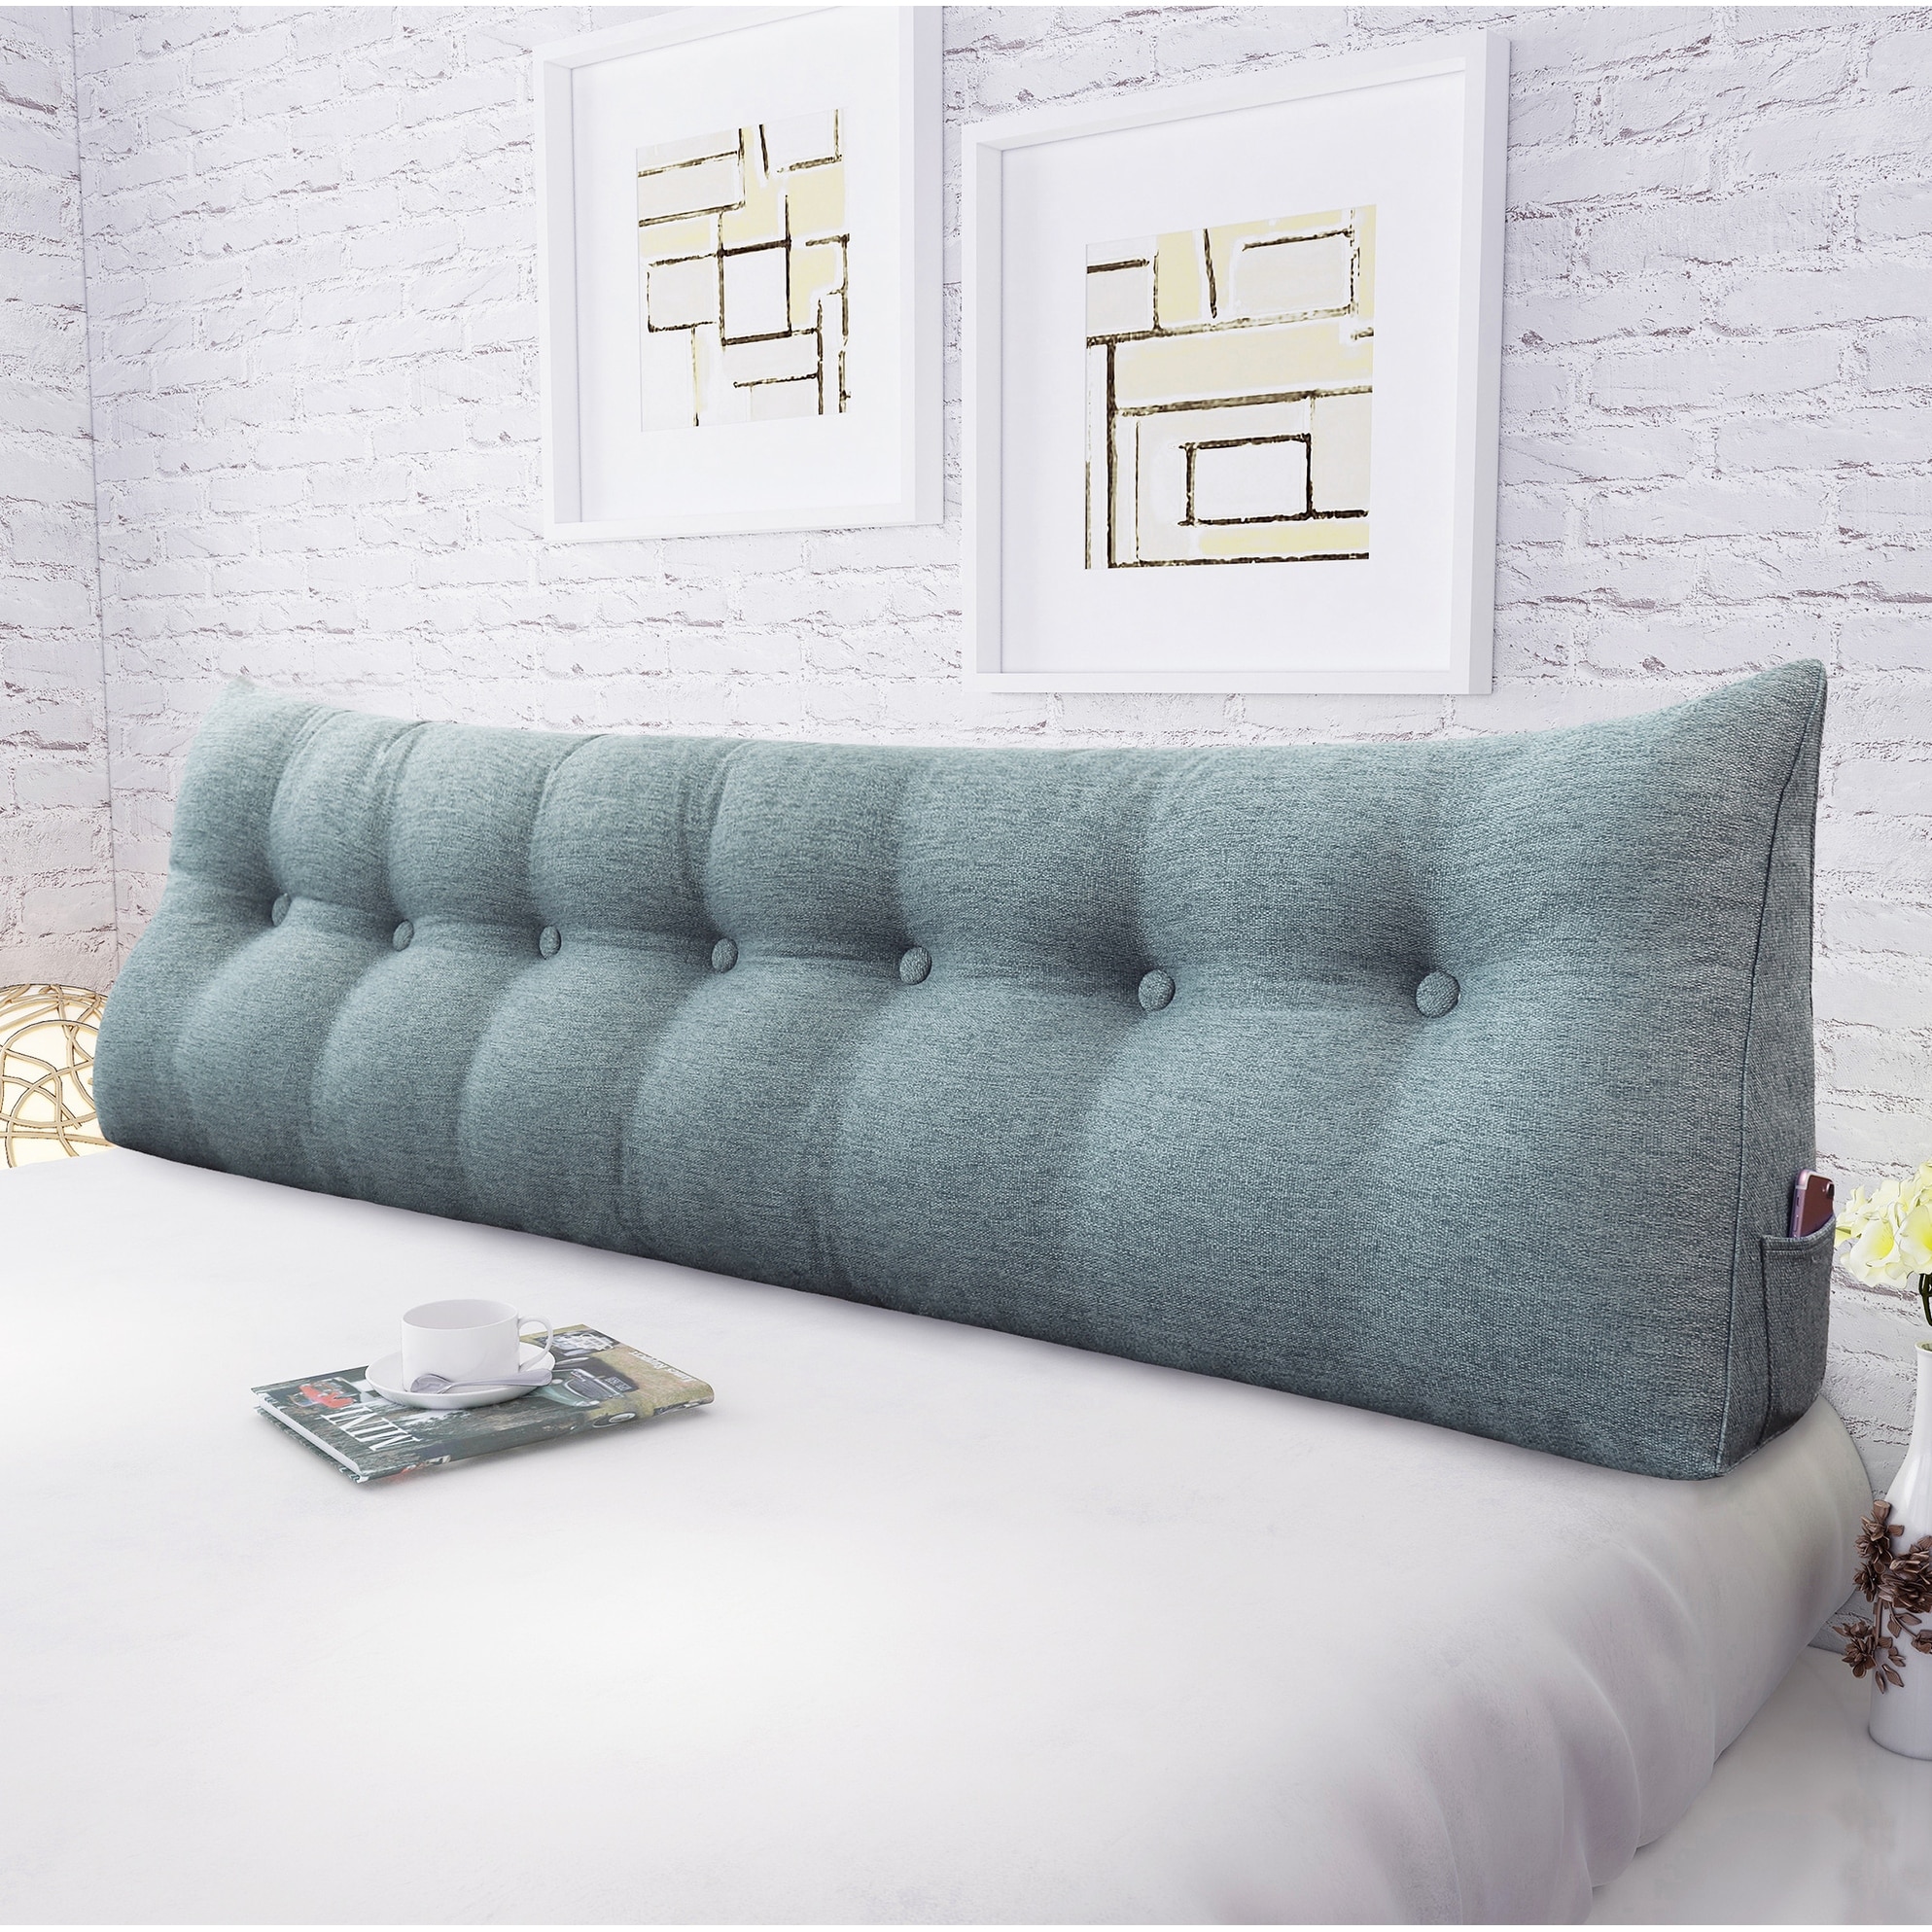 https://ak1.ostkcdn.com/images/products/is/images/direct/07e1f133d4d0481f5961e8e09354b7ea6ed7391b/WOWMAX-Bed-Rest-Wedge-Reading-Pillow-Decorative-Headboard-Bolster-Cushion-Gray.jpg